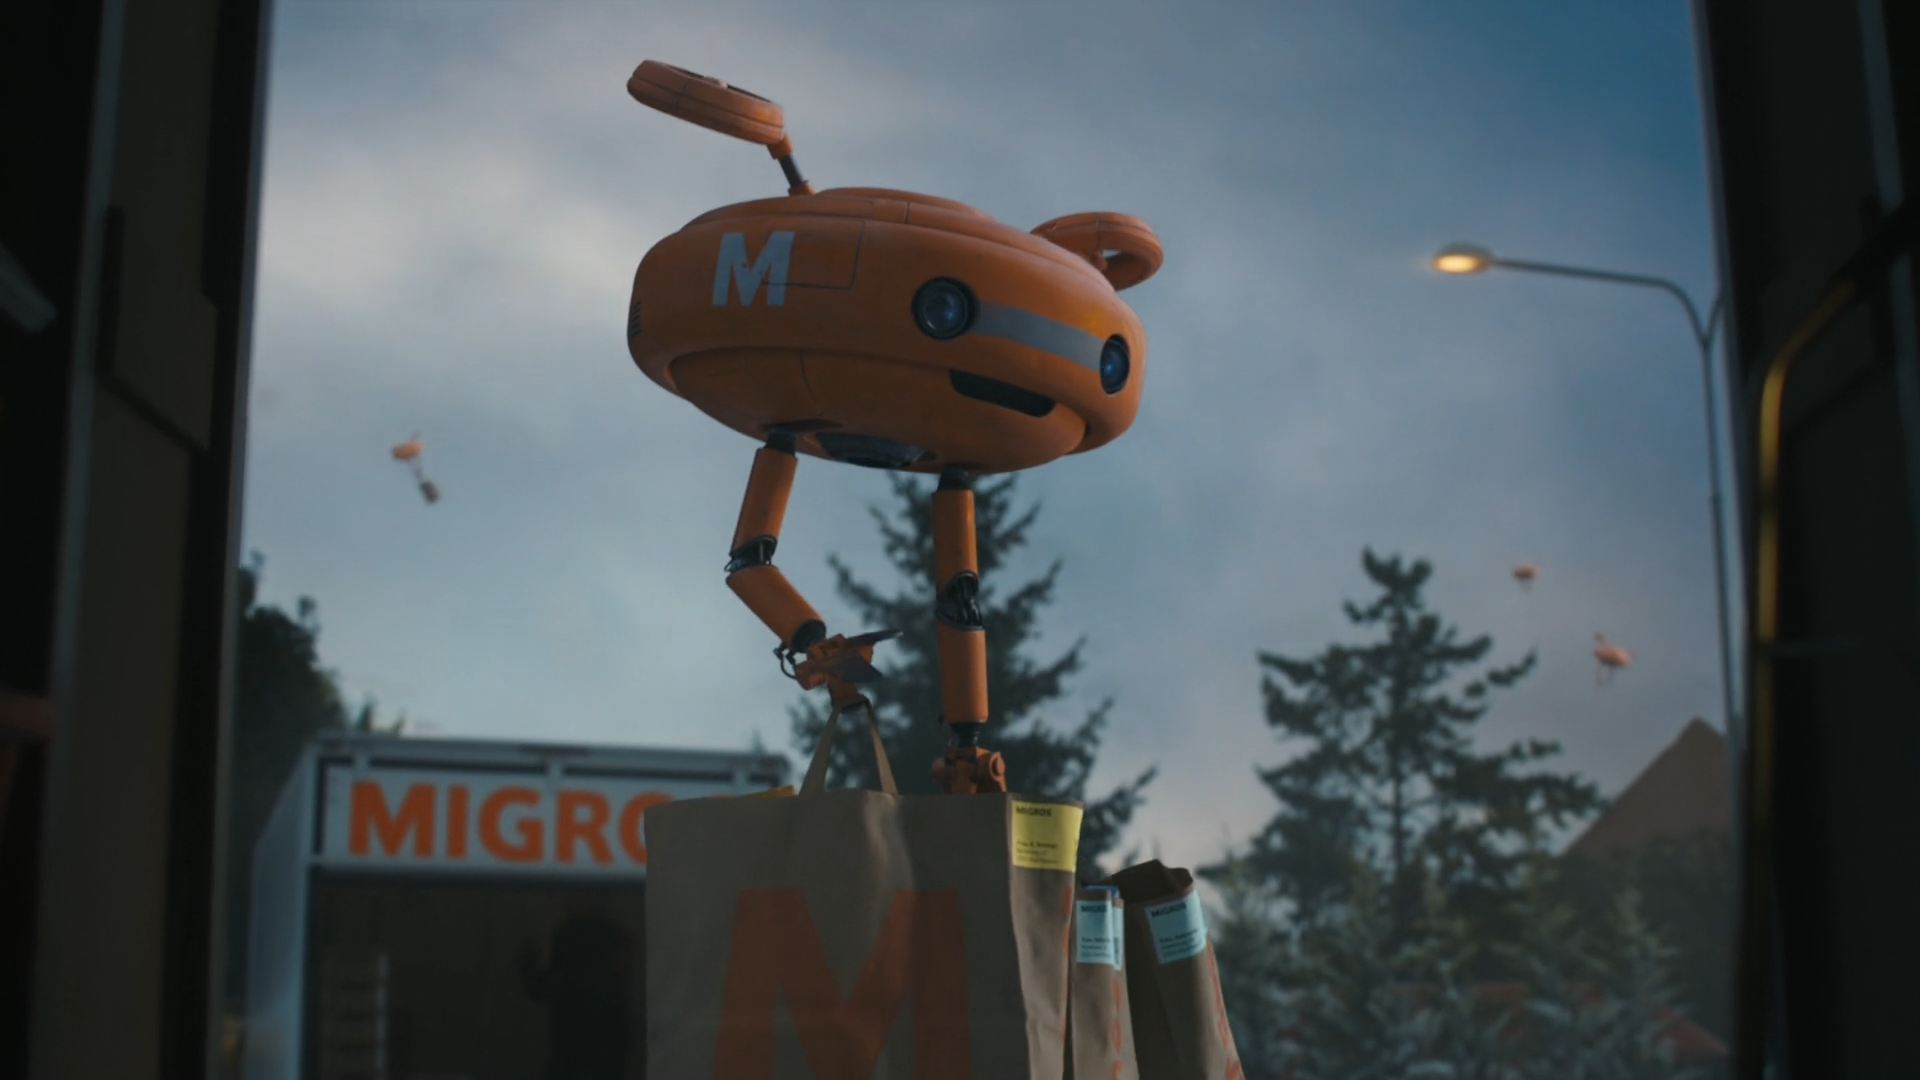 Migros - Robin, The Christmas Drone